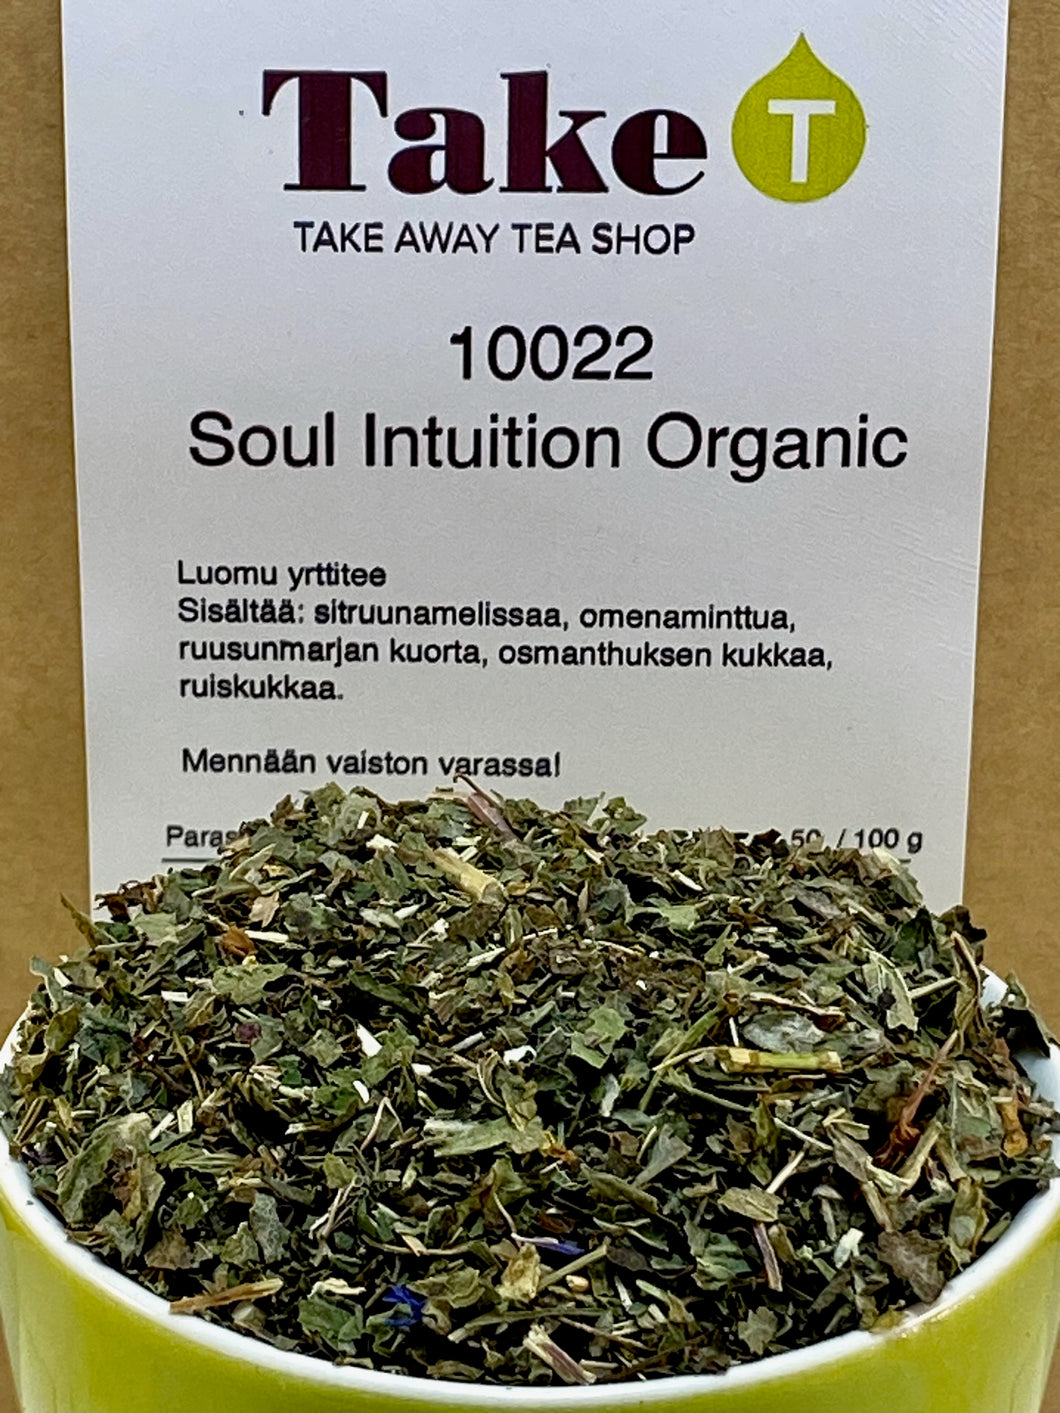 Soul Intuition Organic